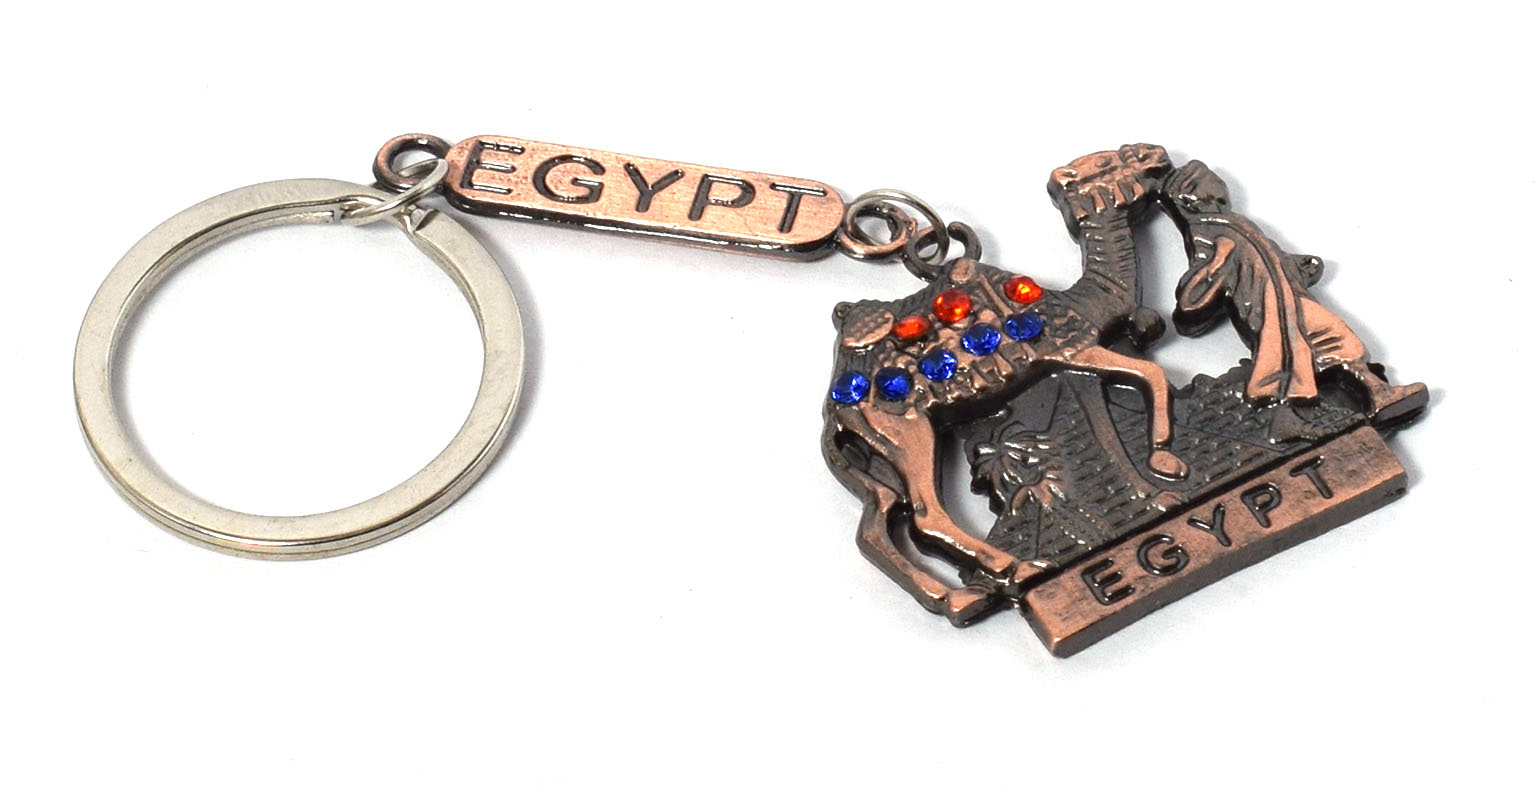 immatgar pharaonic Egyptian Camel with Egypt Name keychain Egyptian souvenirs gifts Inspired Gift from Egypt ( Burnt Red )